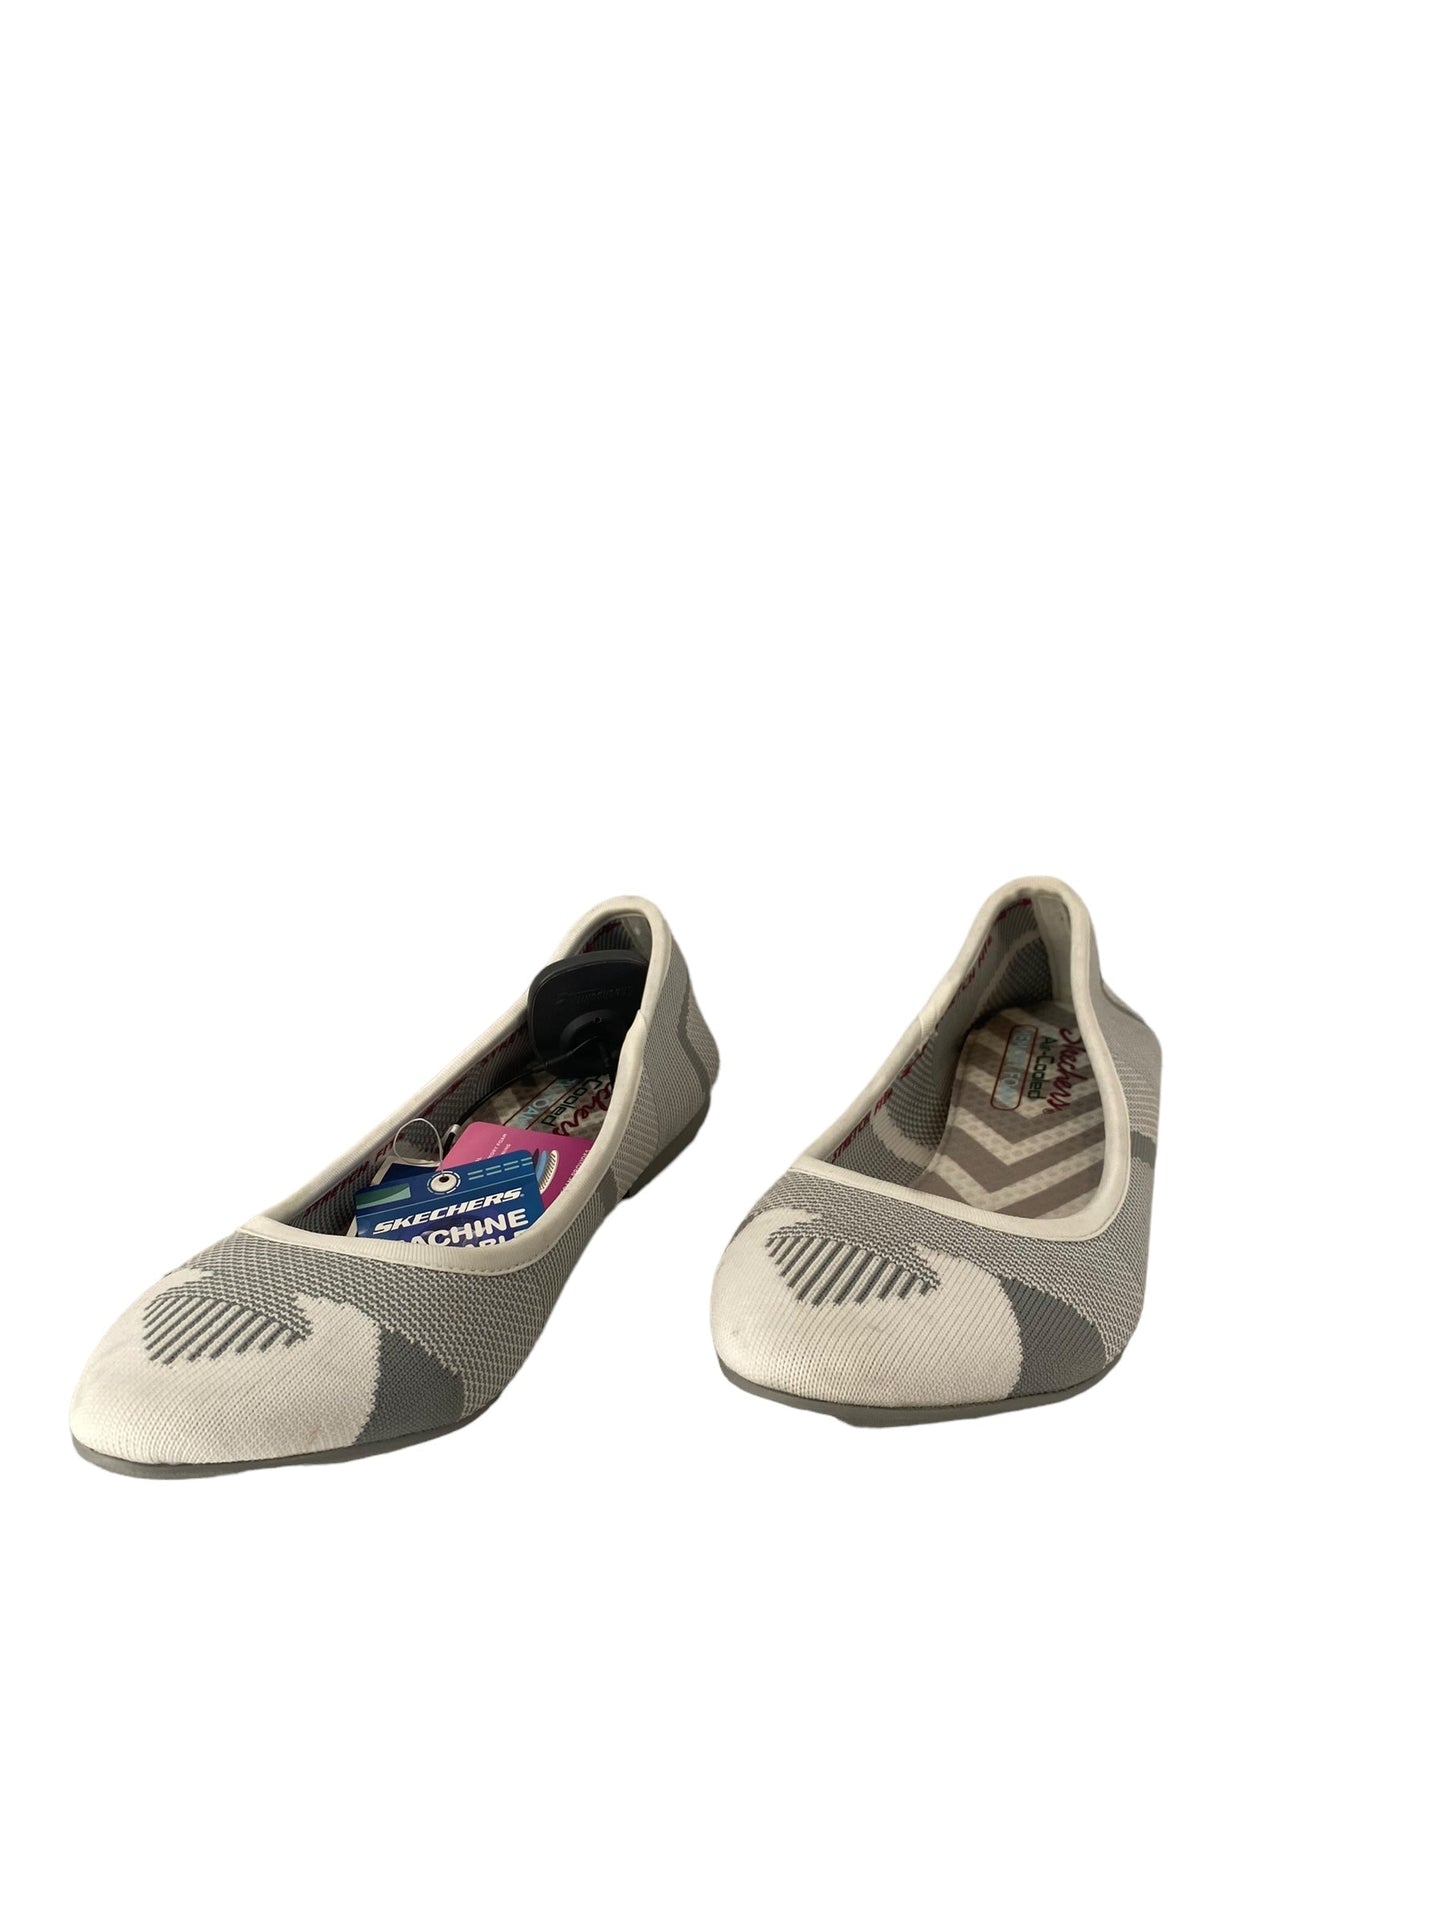 Grey & White Shoes Flats Skechers, Size 9.5